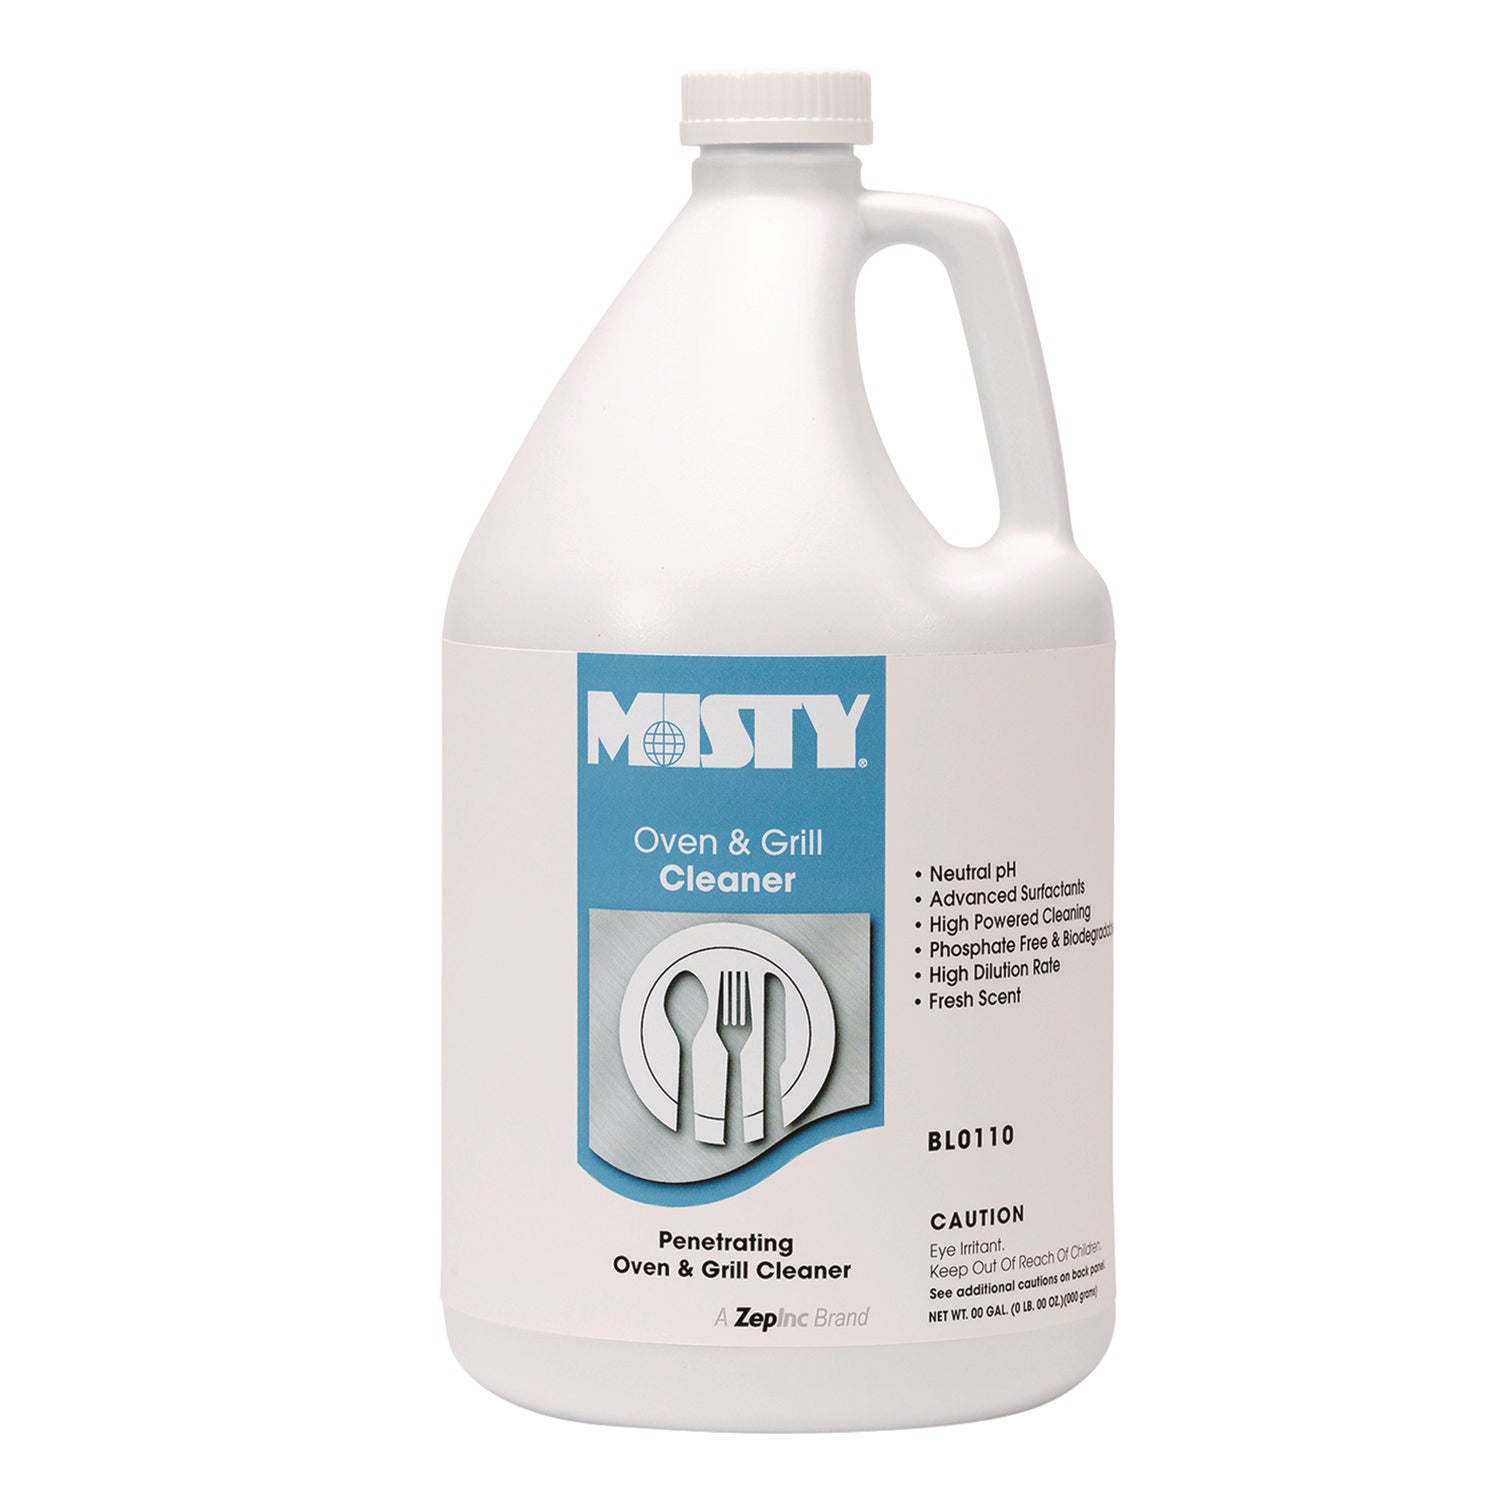 Heavy-Duty Oven and Grill Cleaner, 1 gal Bottle - 2